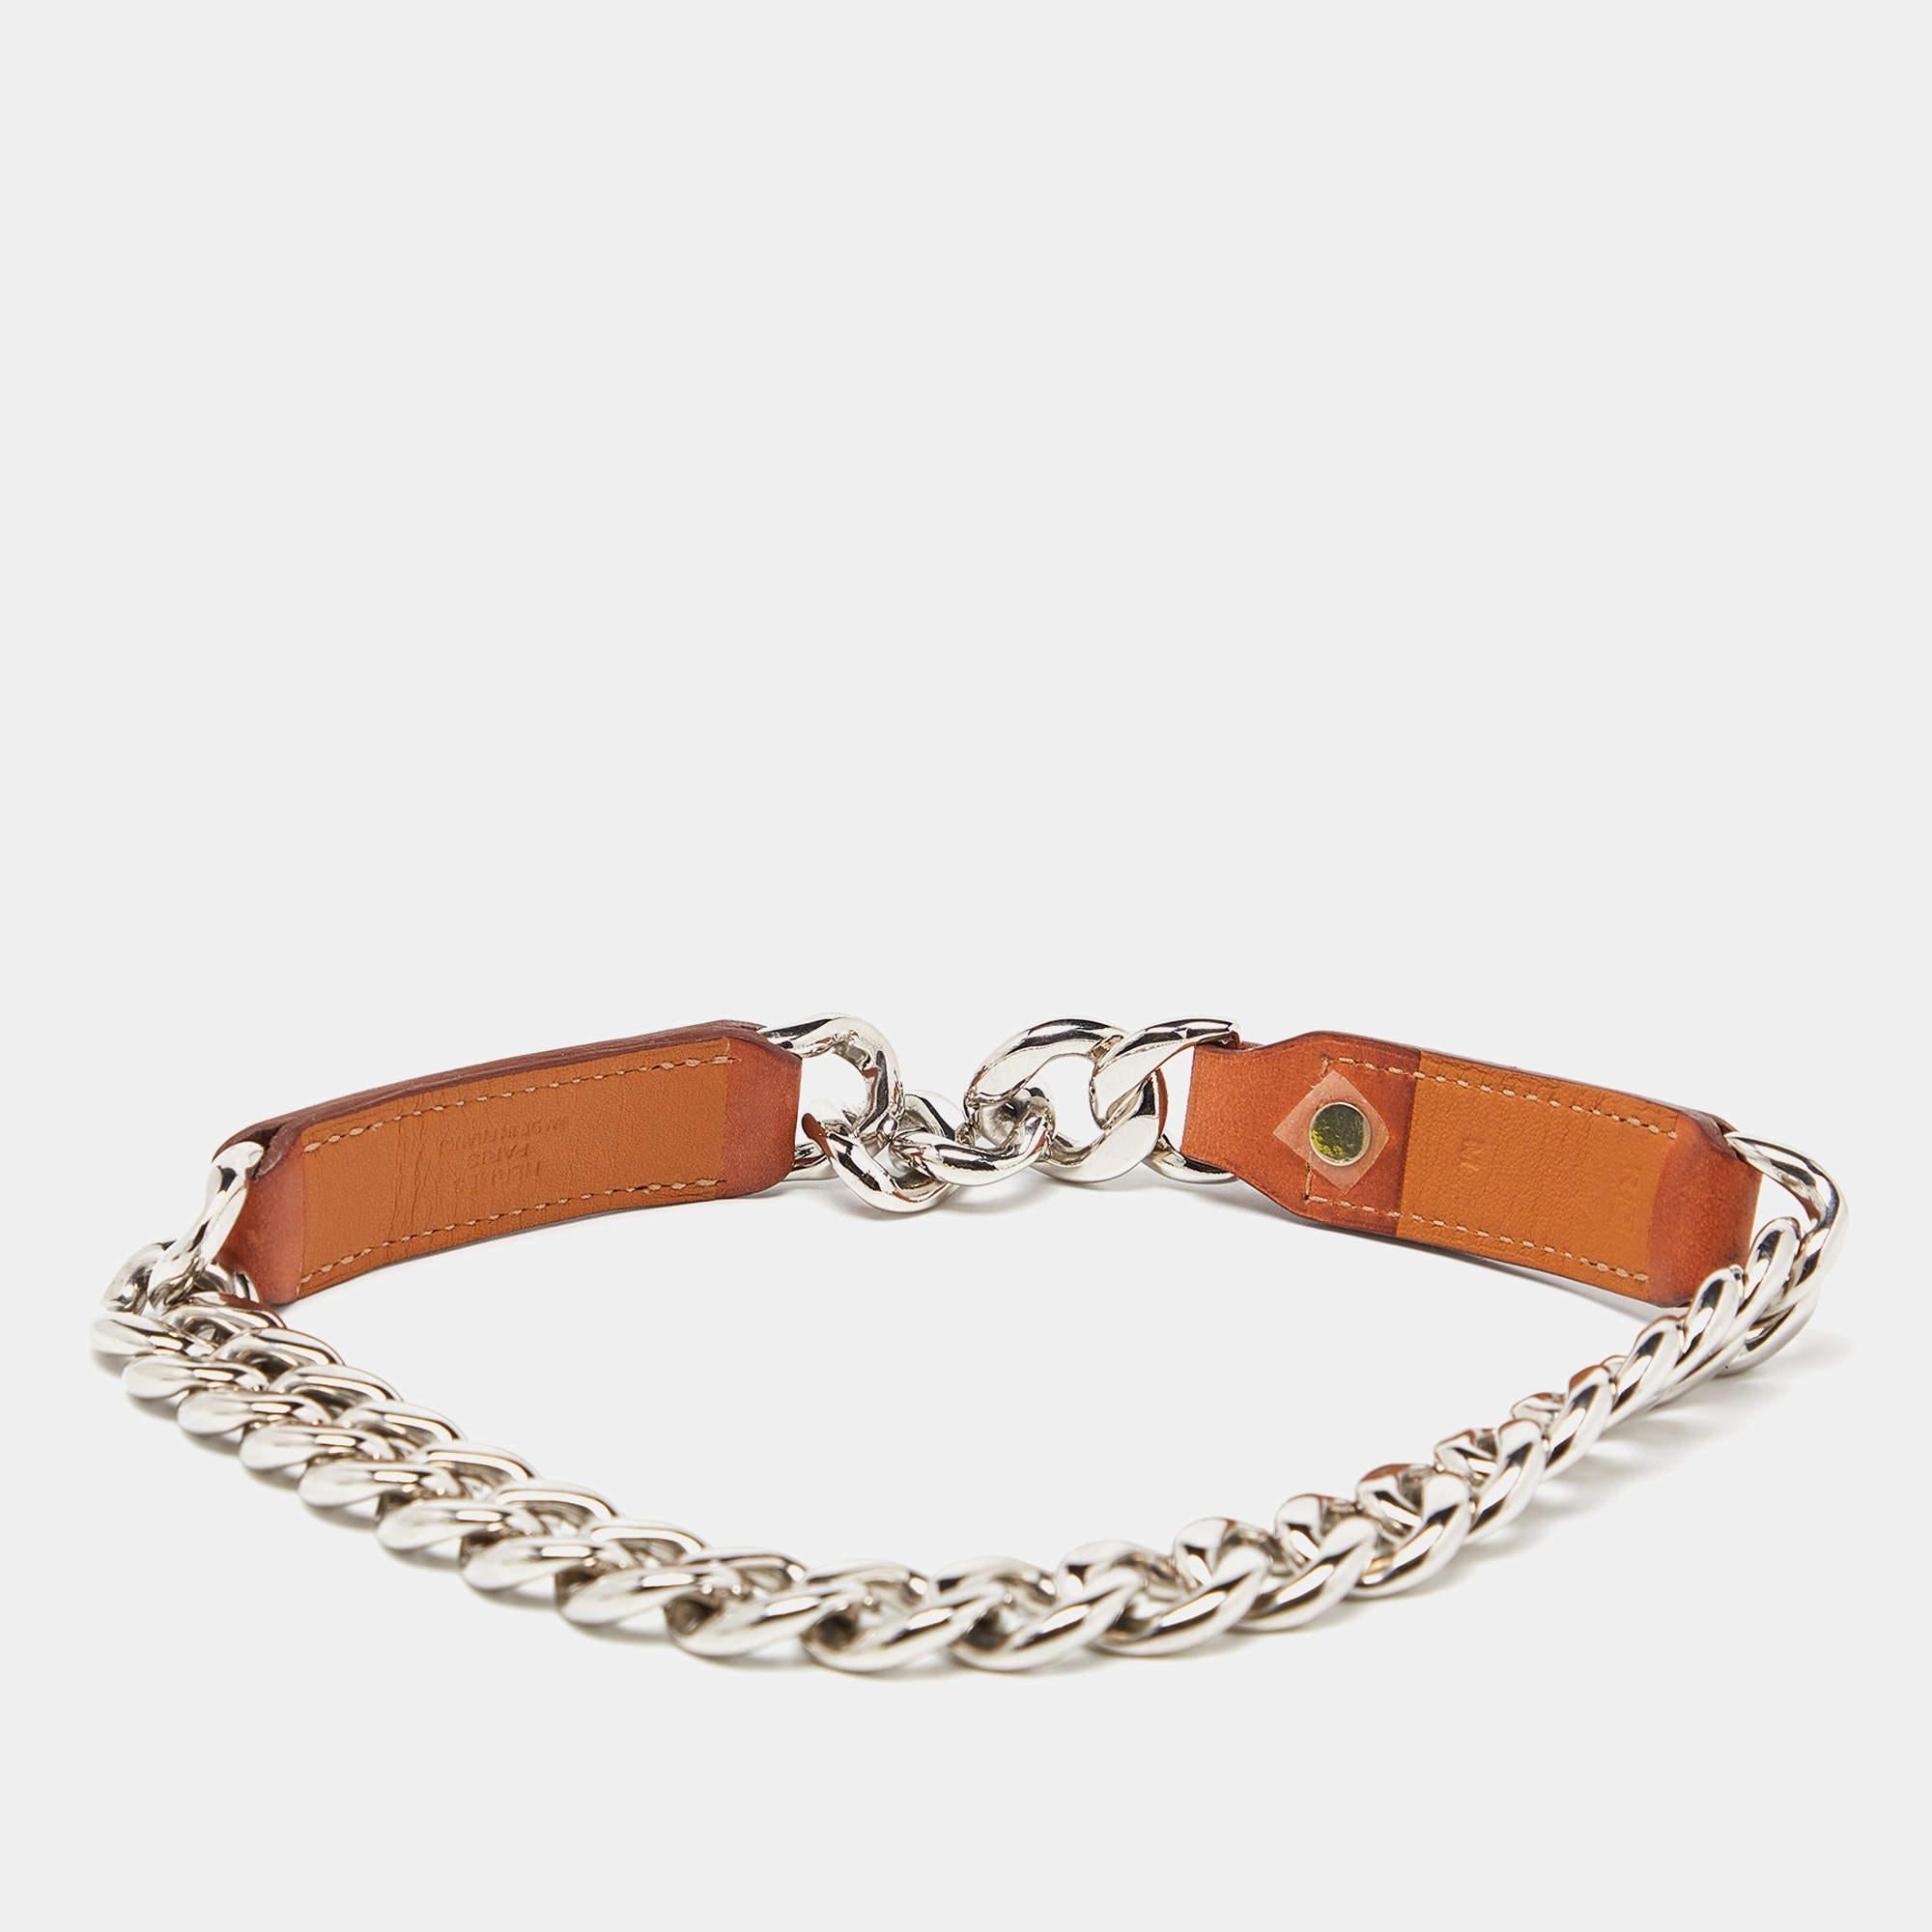 Here's a little something from Hermes for your dog. It is made of brown leather and silver-tone metal, complete with a simple clasp.

Includes: Original Pouch

